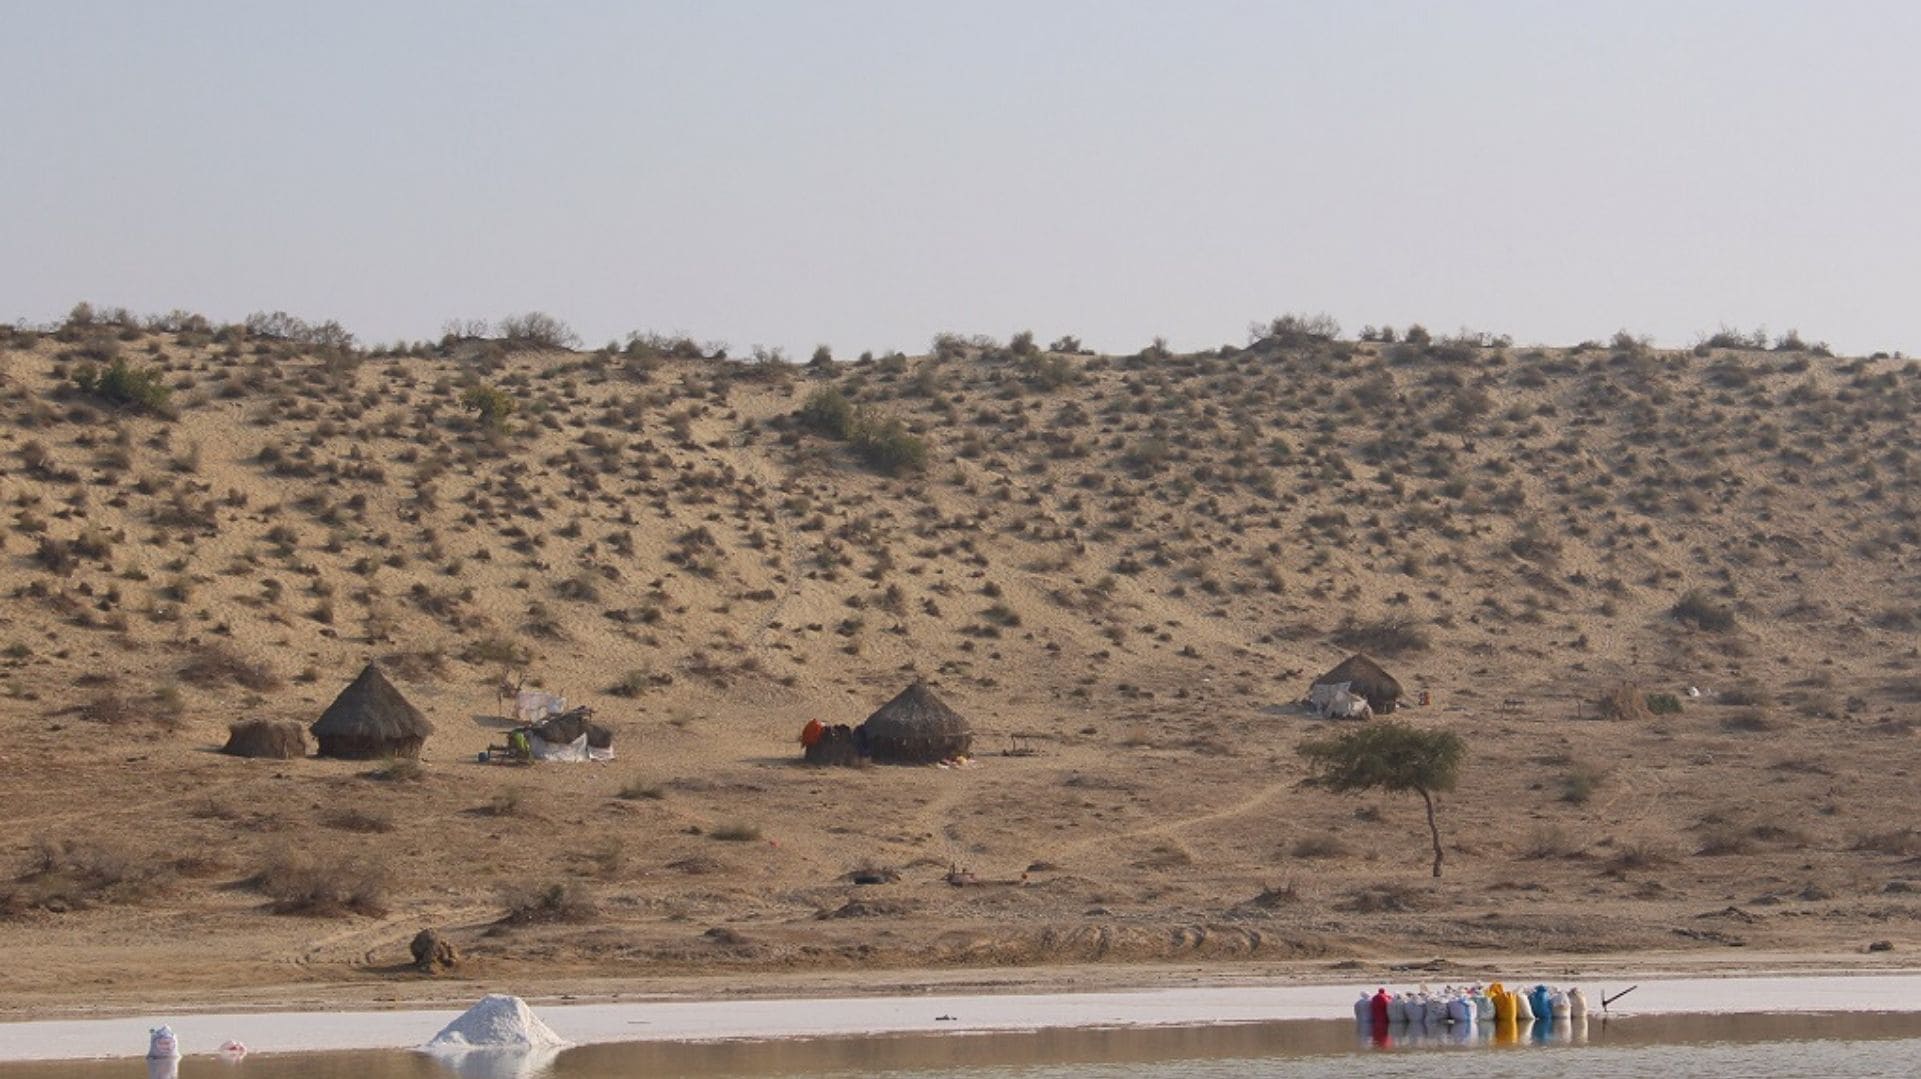 Beyond Achro Thar's scenic landscape, harsh reality of salt miners' living conditions, wages